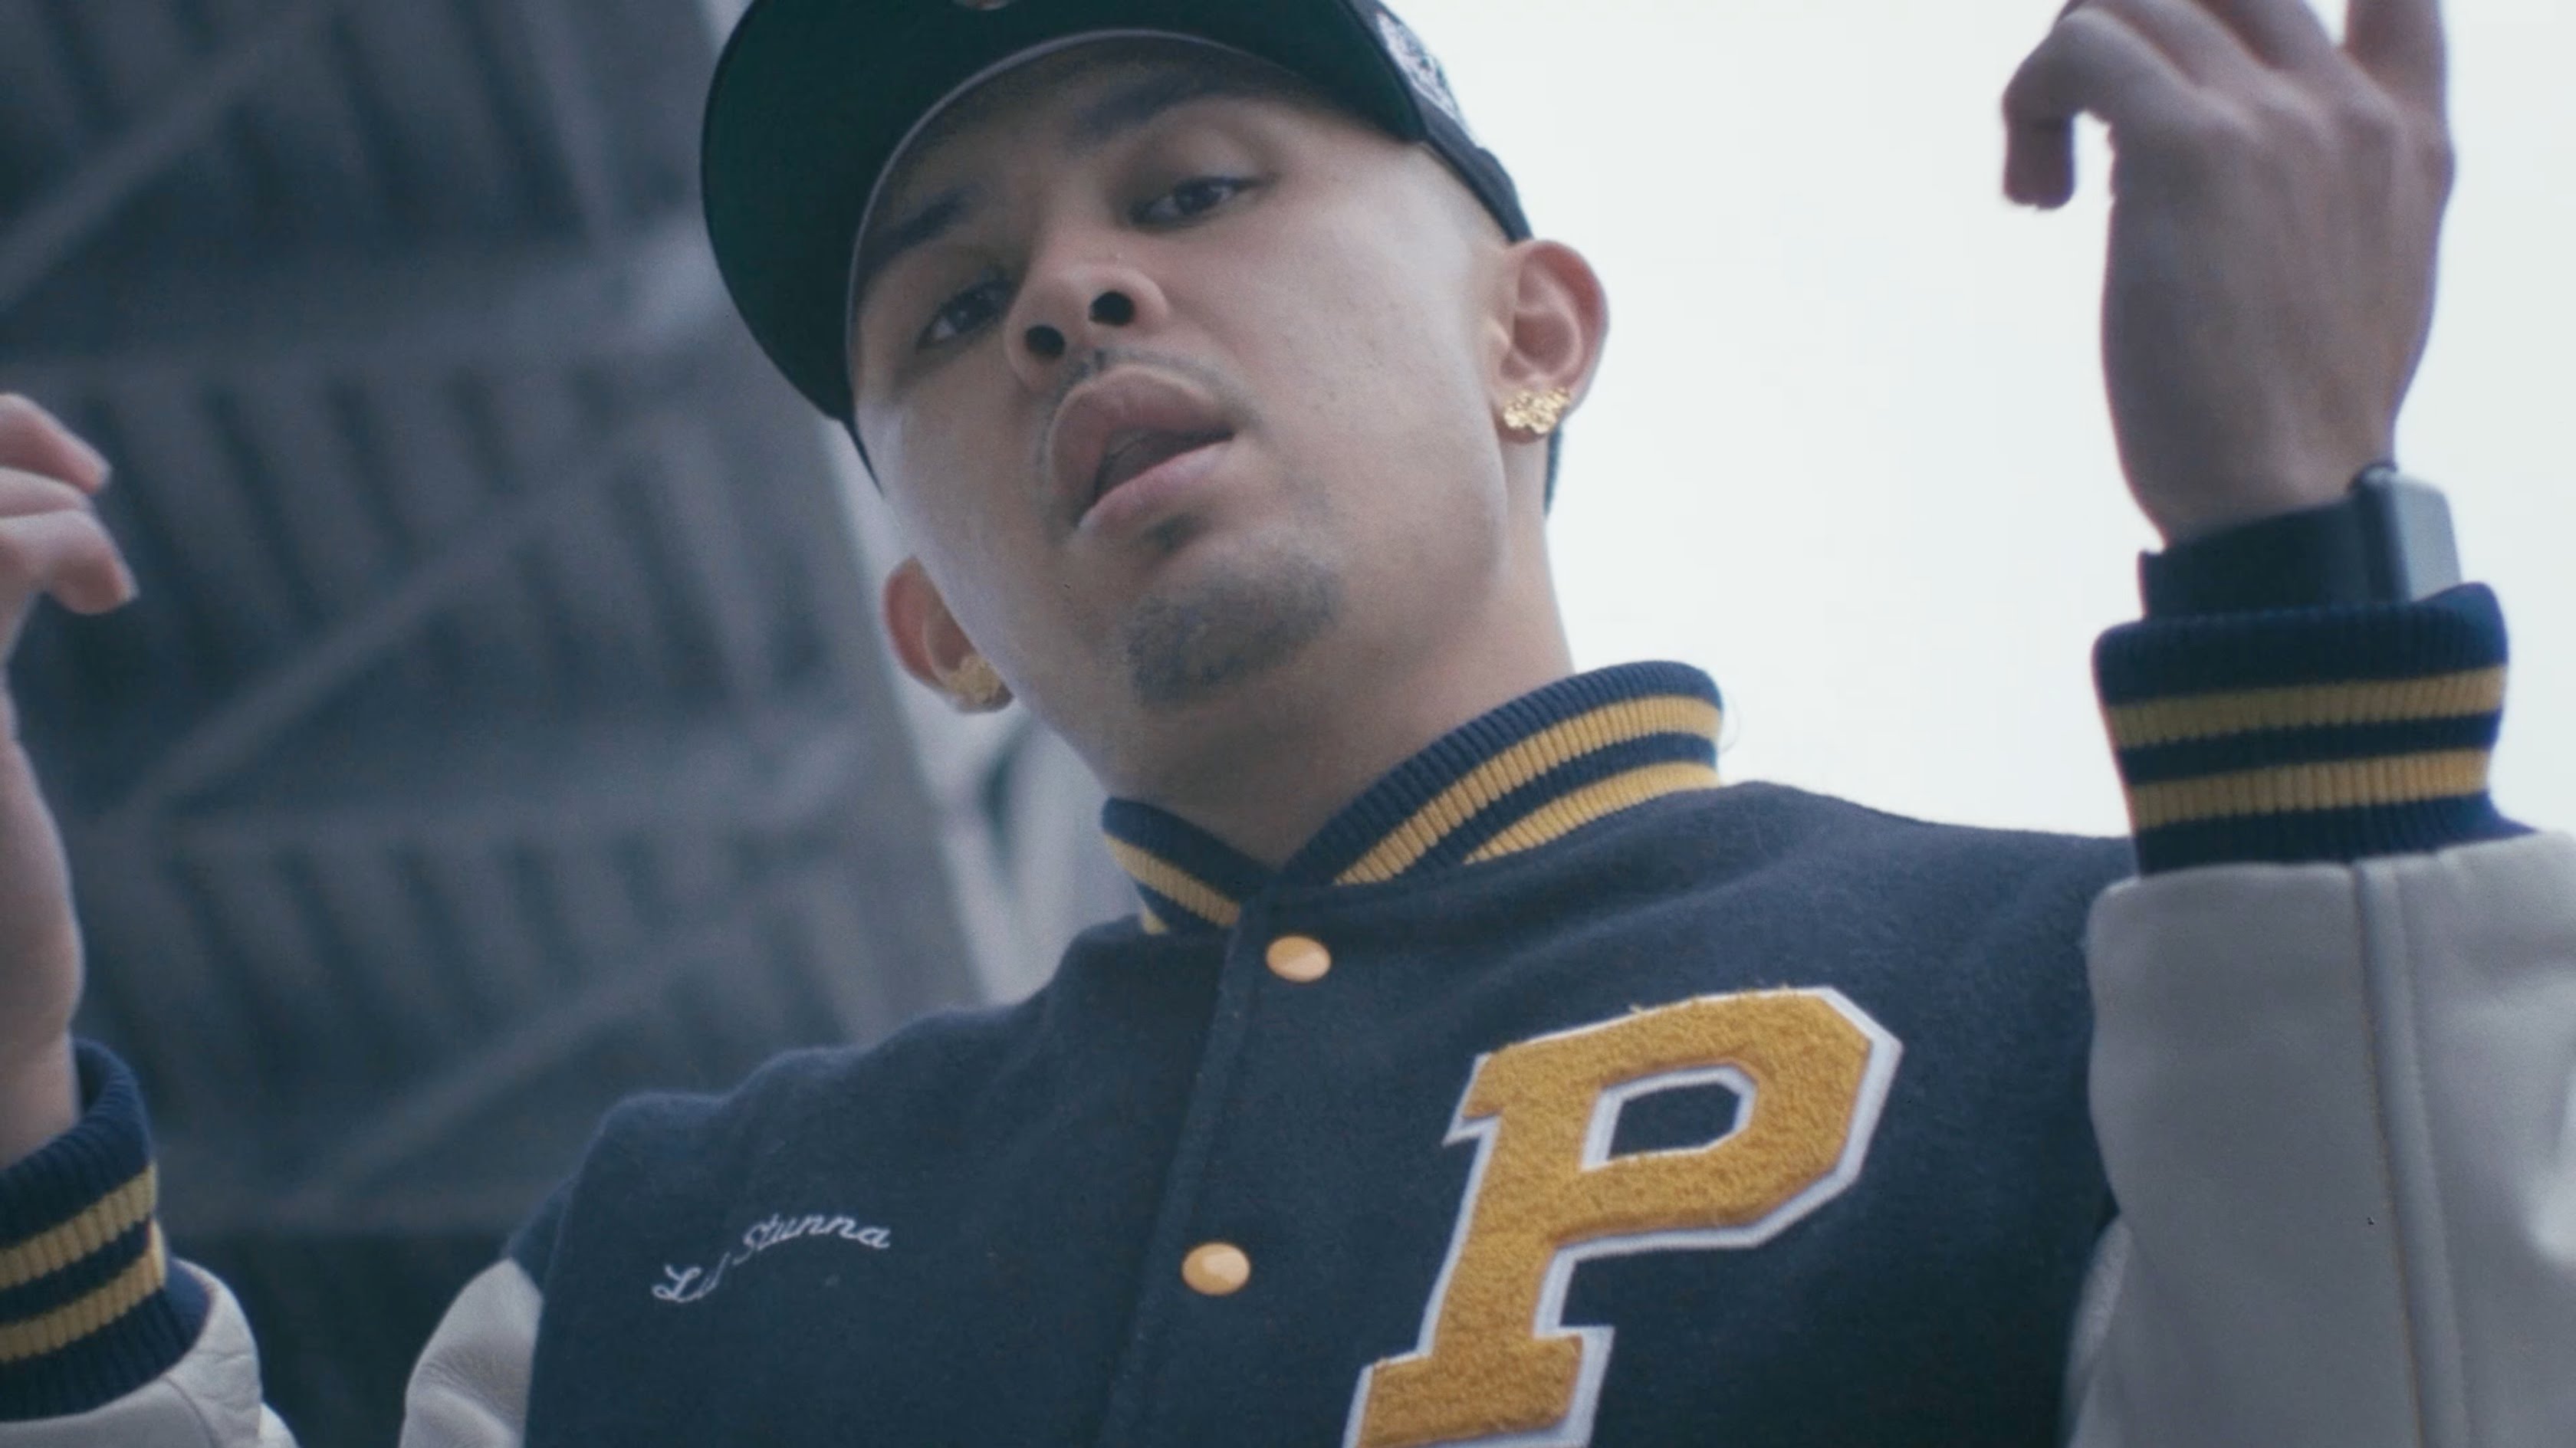 P-Lo – “Light This Bitch Up” feat. G-Eazy & Jay Ant [VIDEO]